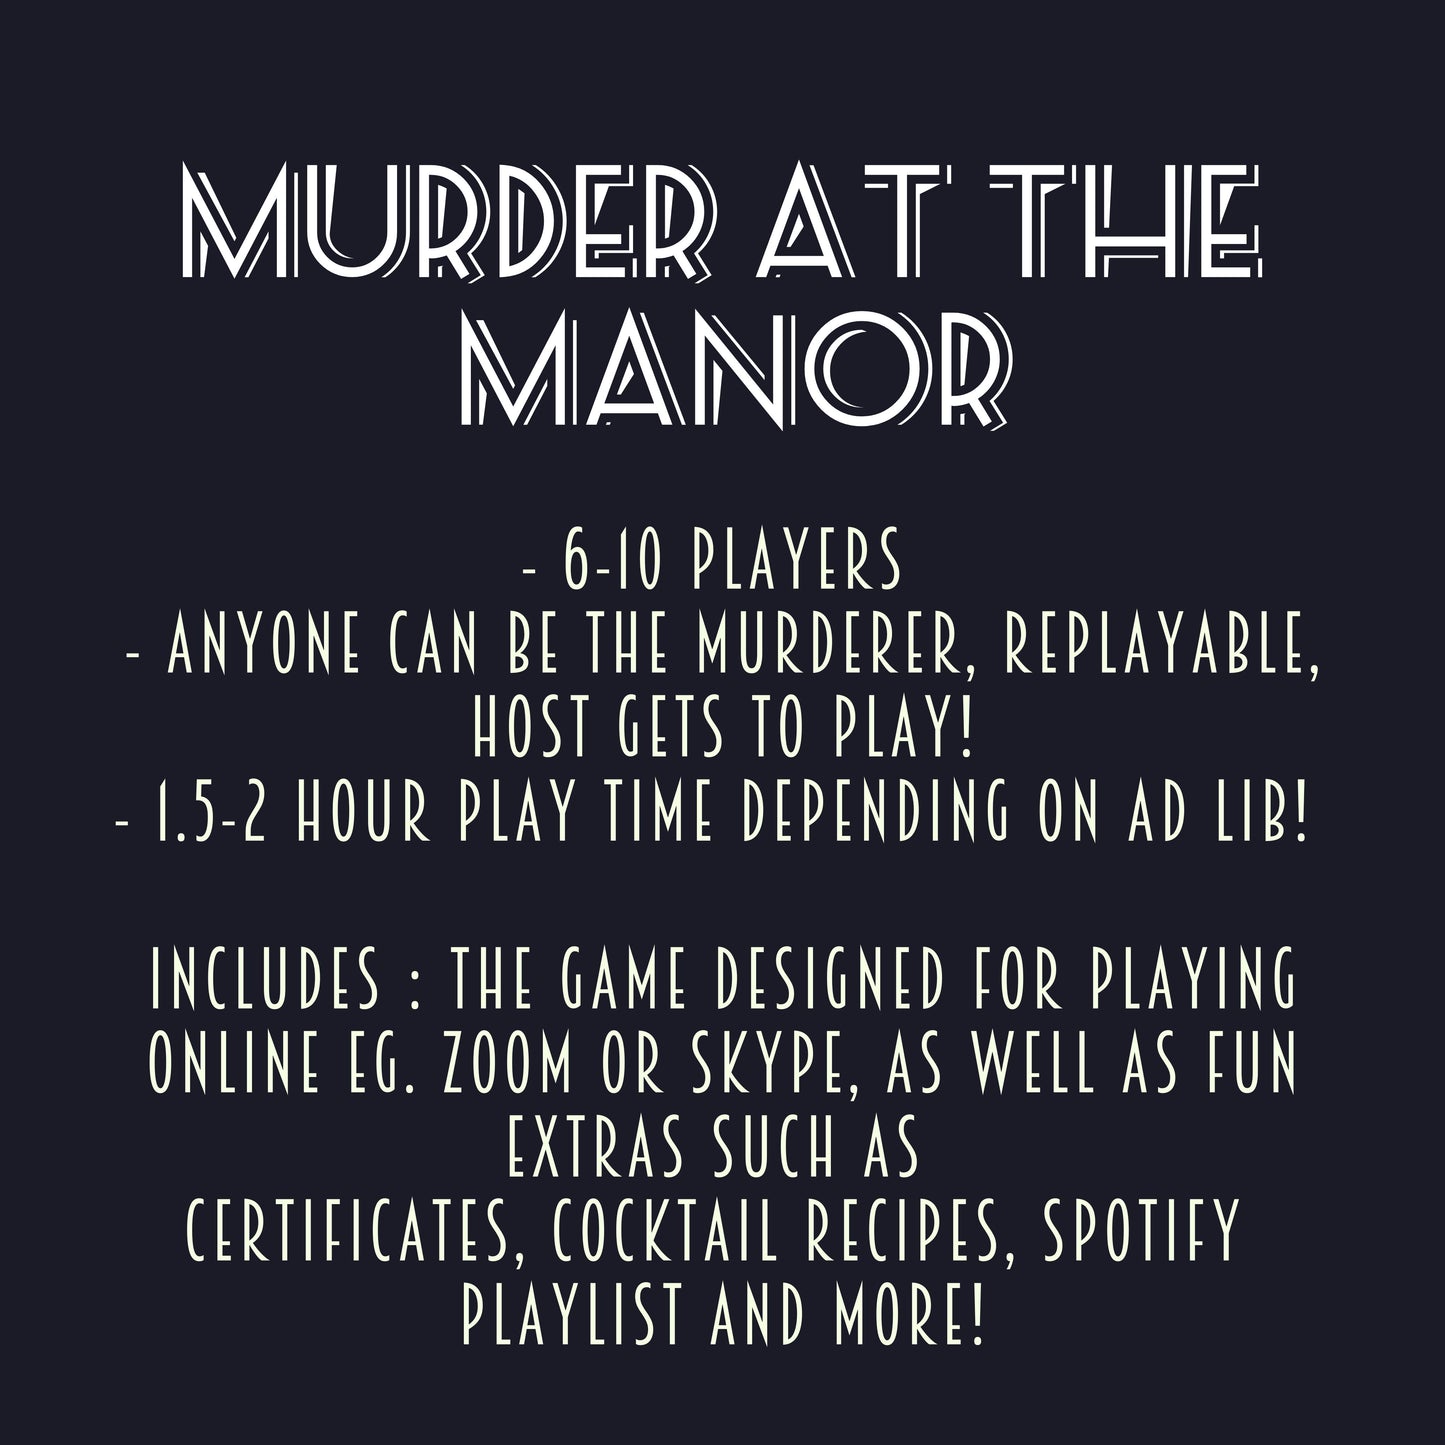 Anyone can be the murderer, replayable and the host gets to play, 1.5 - 2 hours playing time